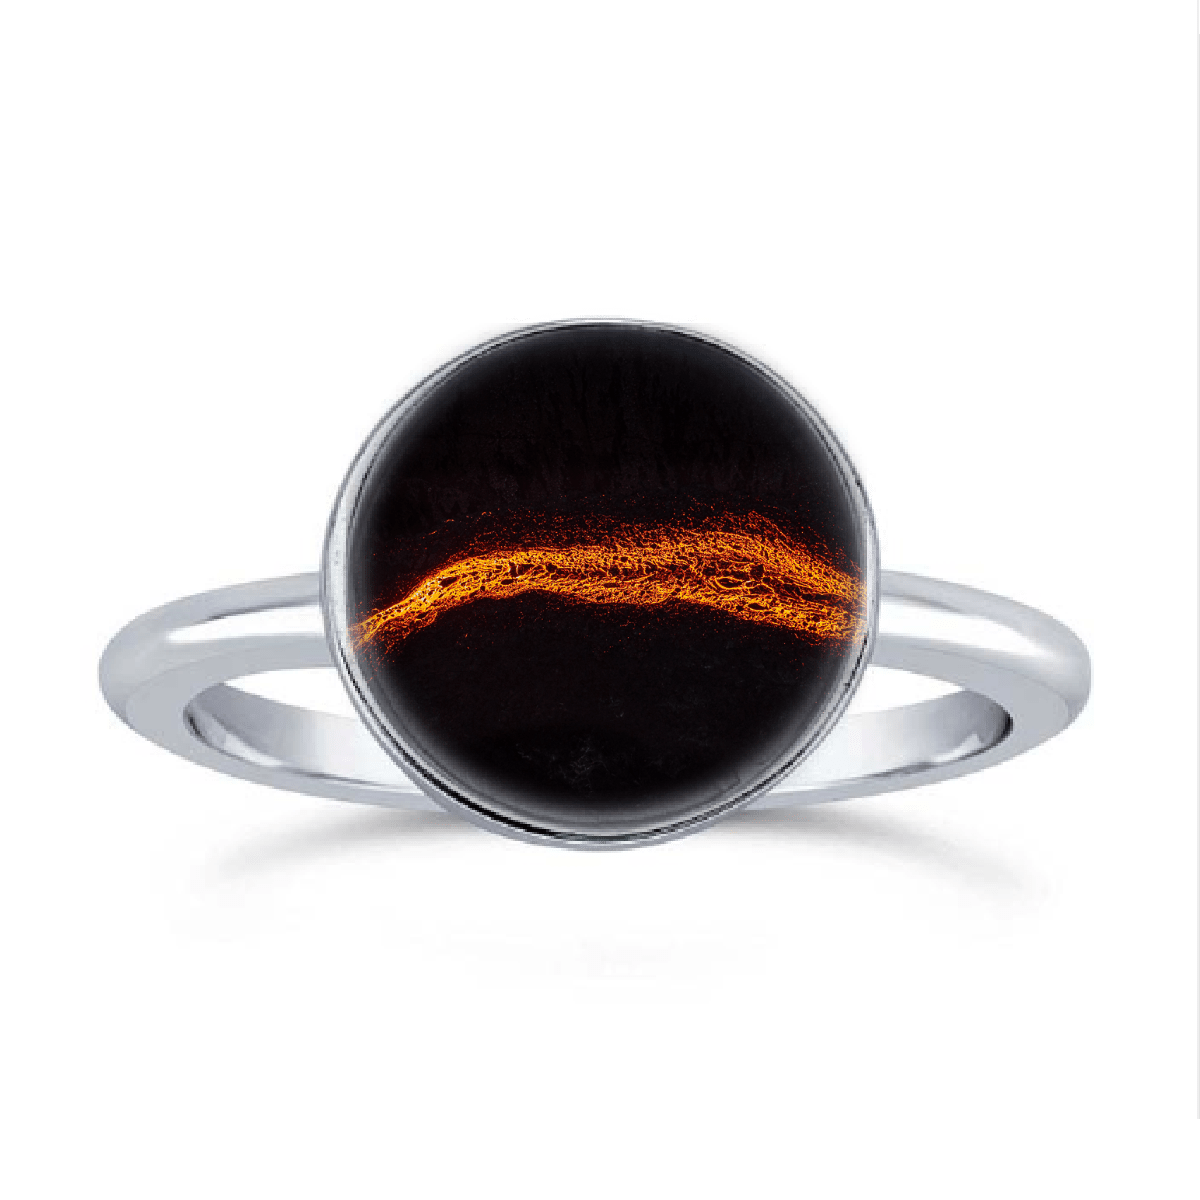 Icelandic Lava Flow Ring by Allie Richards